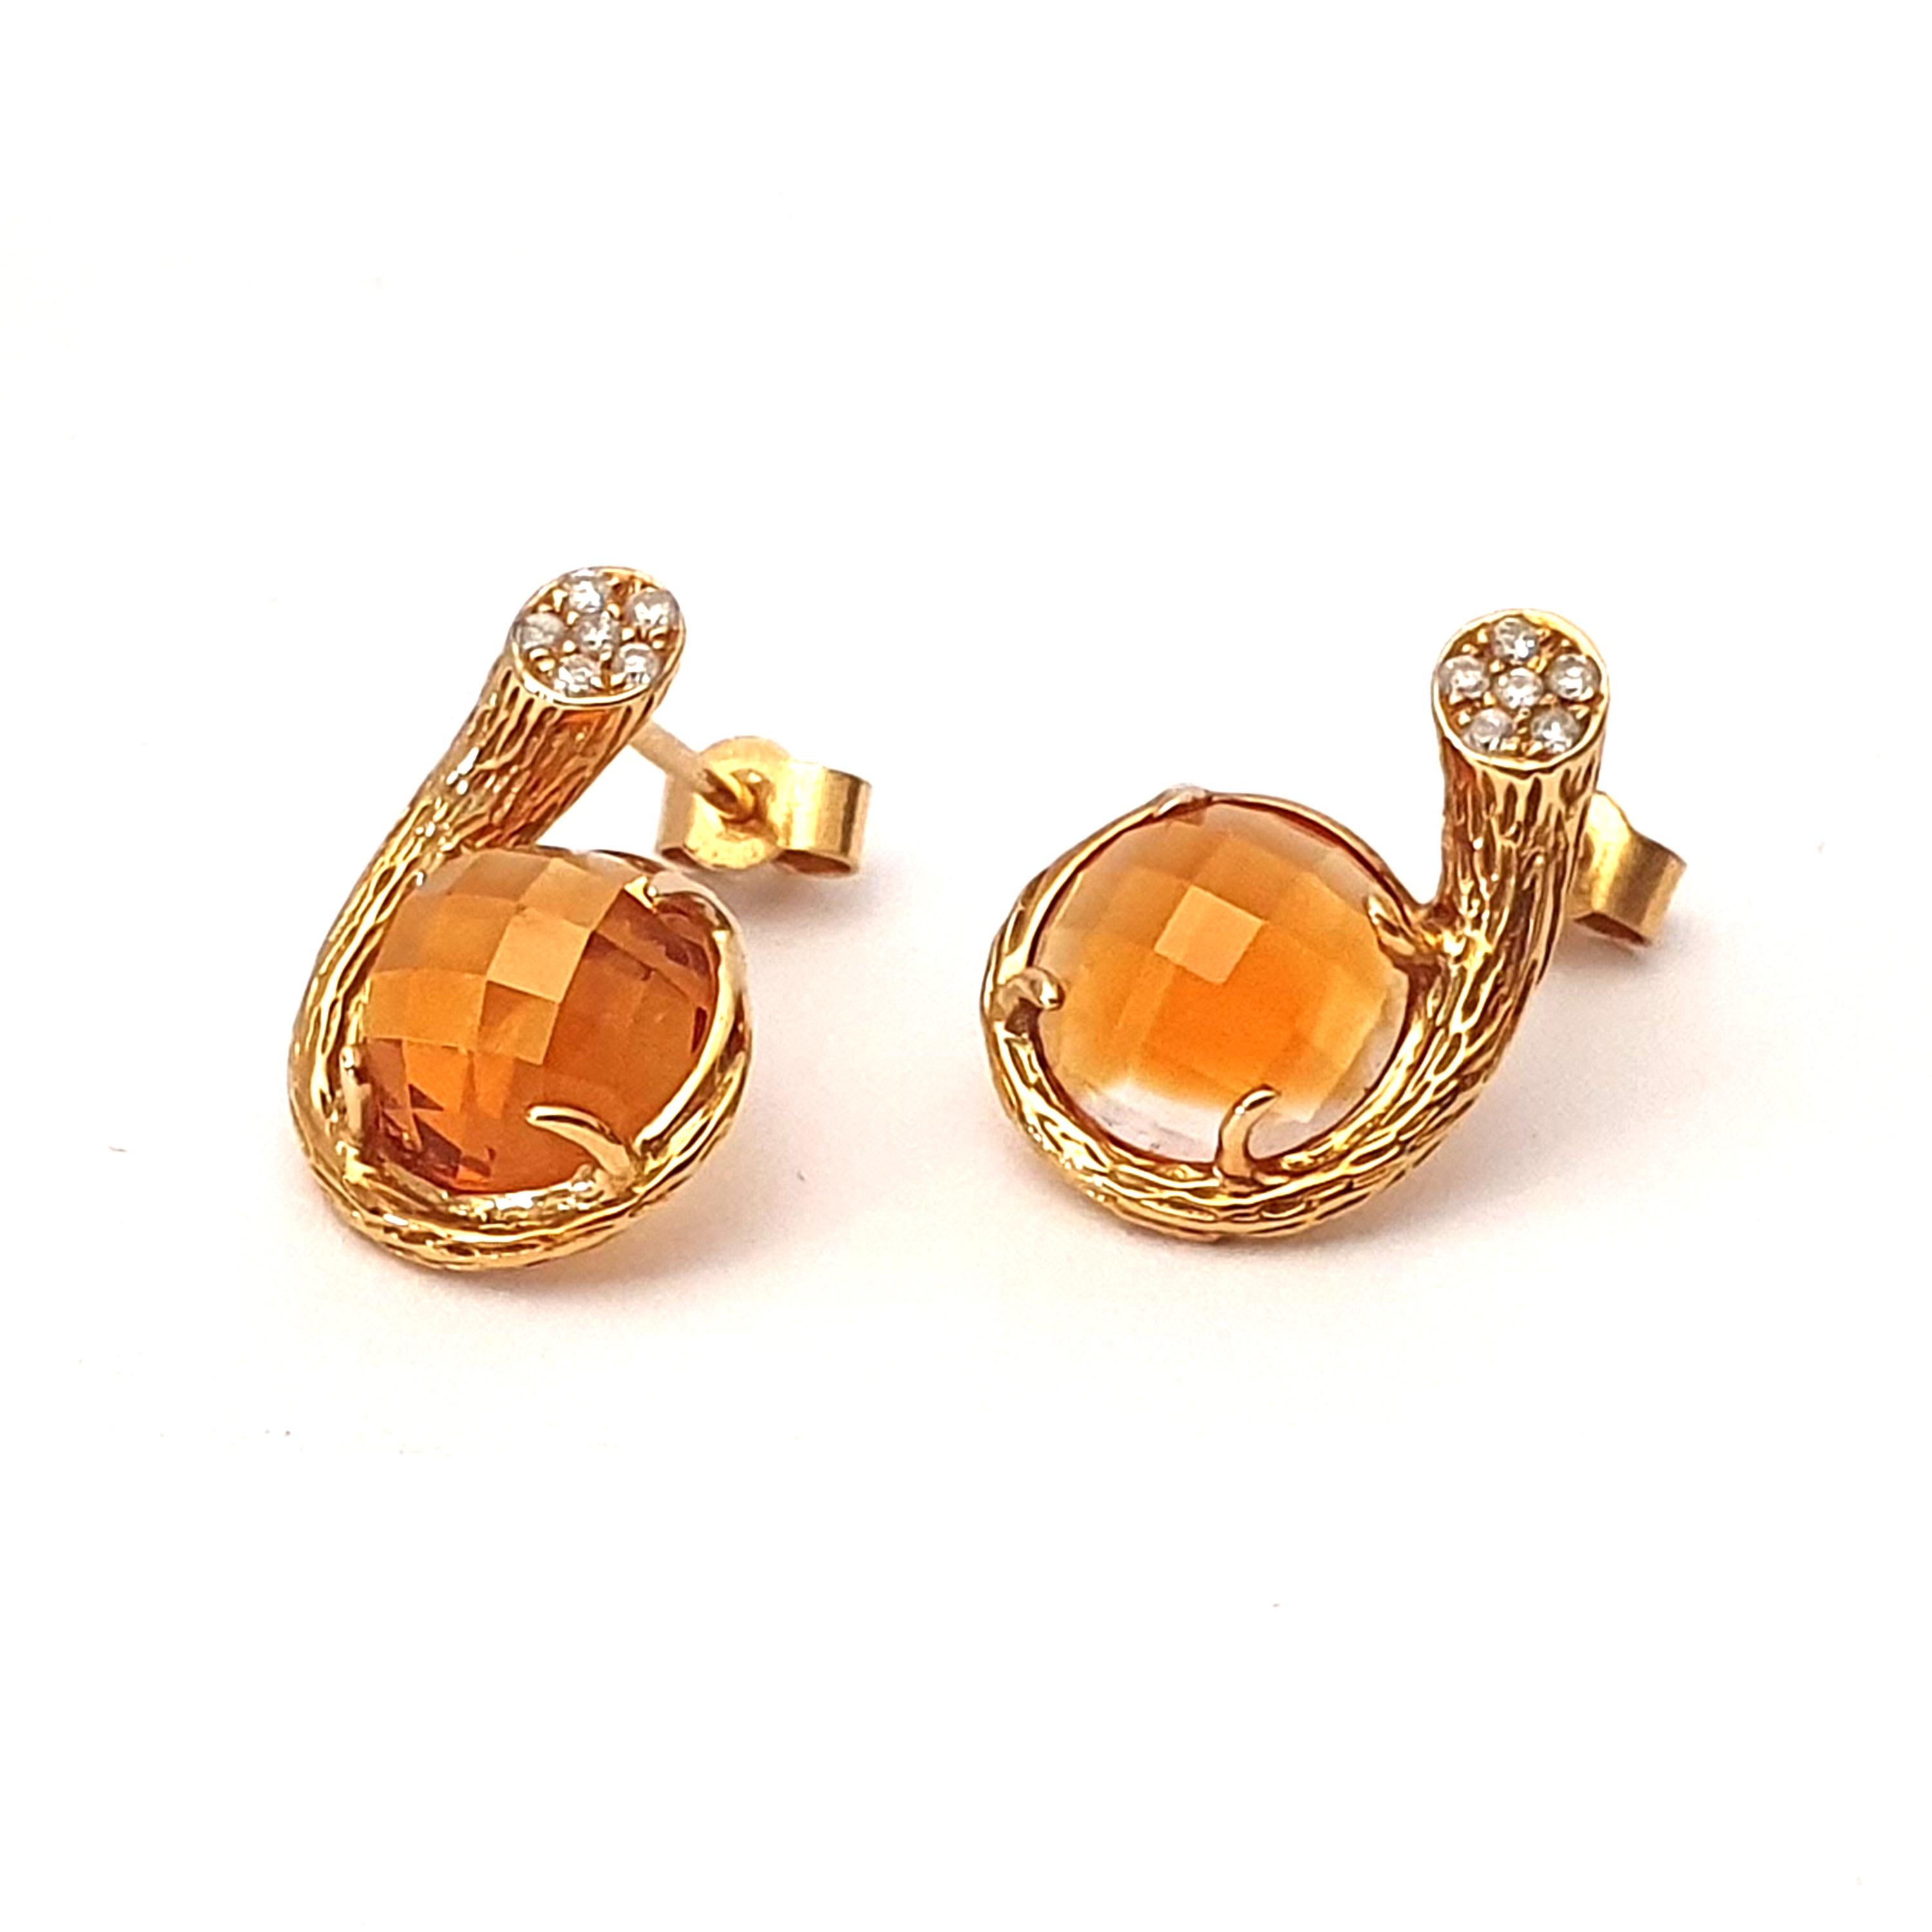 Description:
A luxuriously outwardly collection inspired by the vibrant coral reef. The Dawn collection by Fei Liu reimagines coral life through texture metals and vivid gemstones.

Dawn stud earrings with checkerboard cut citrine and sparkling